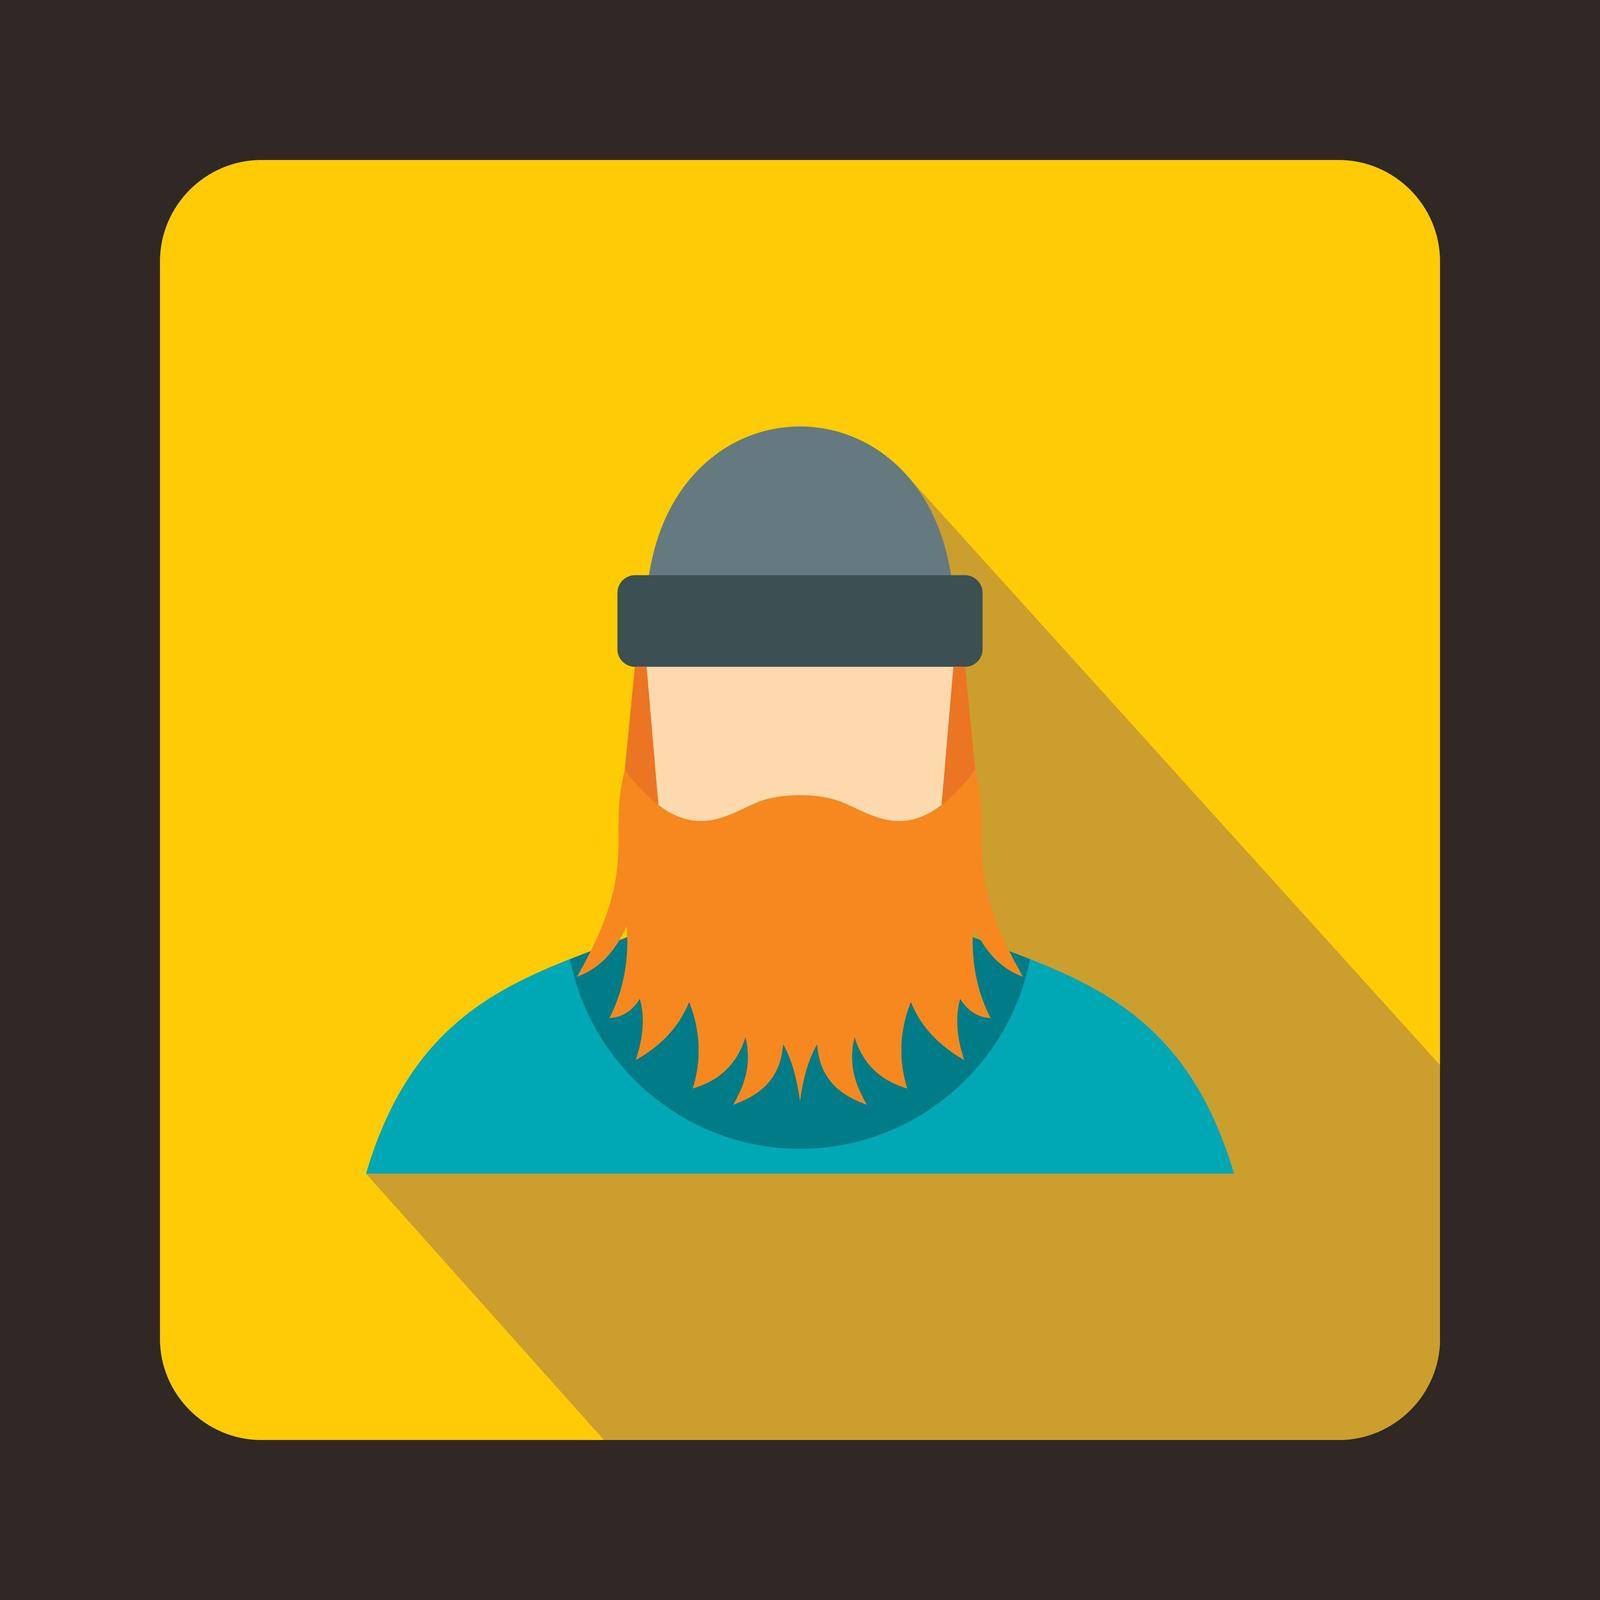 Lumberjack icon in flat style with long shadow. Employee symbol